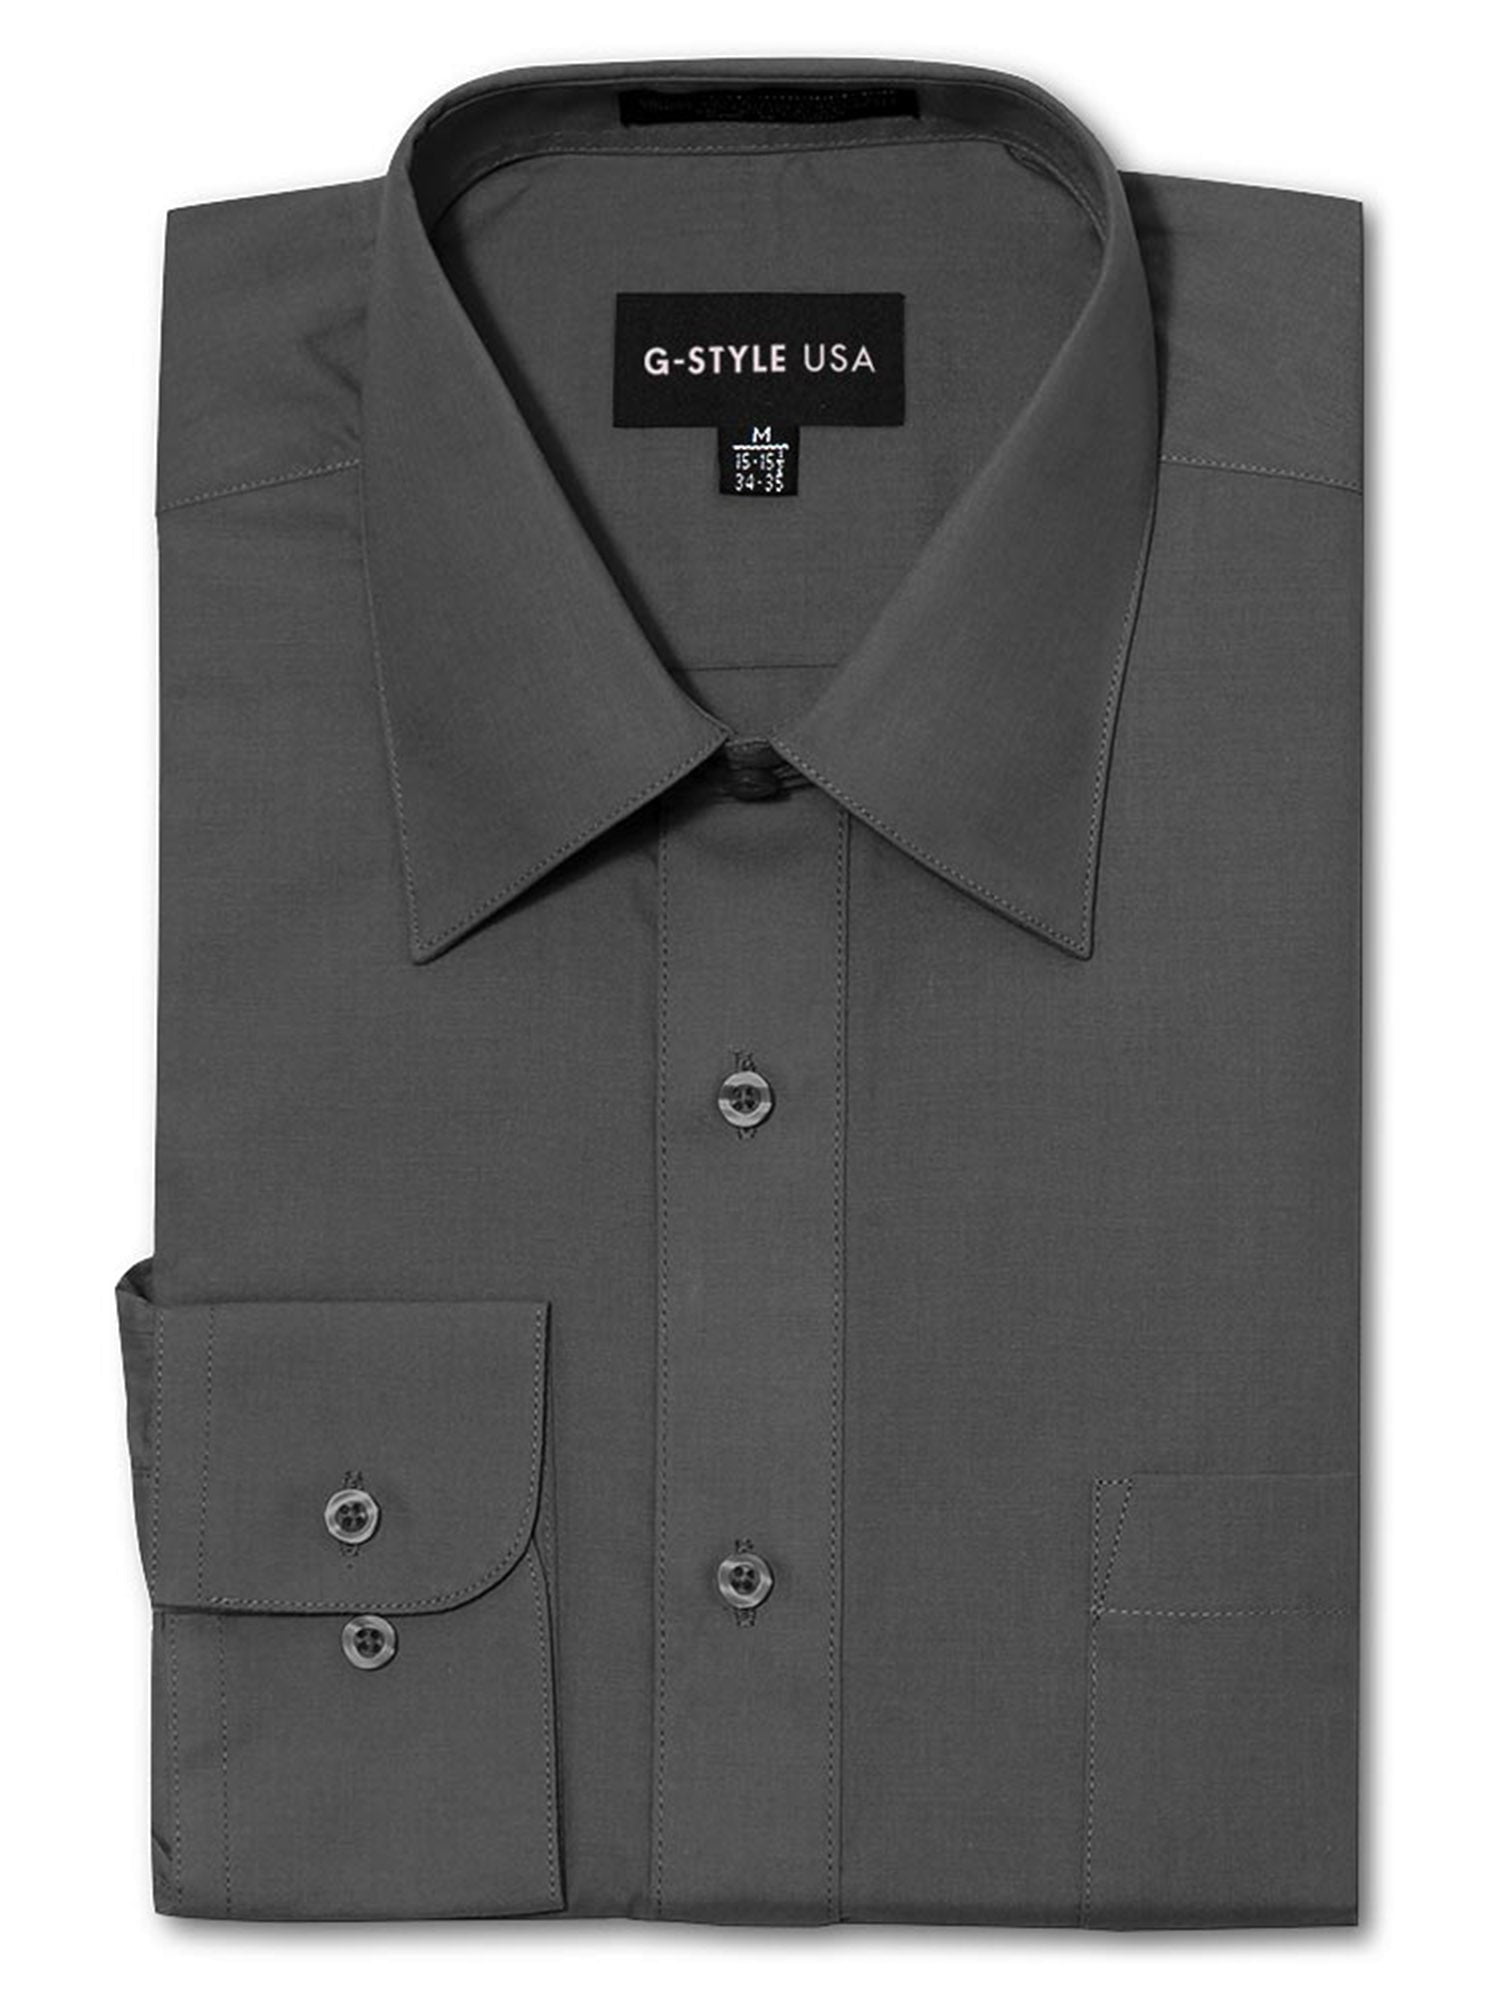 G-Style USA Men's Regular Fit Long Sleeve Solid Color Dress Shirts -  Charcoal - Small - 15-15.5 - 30-31